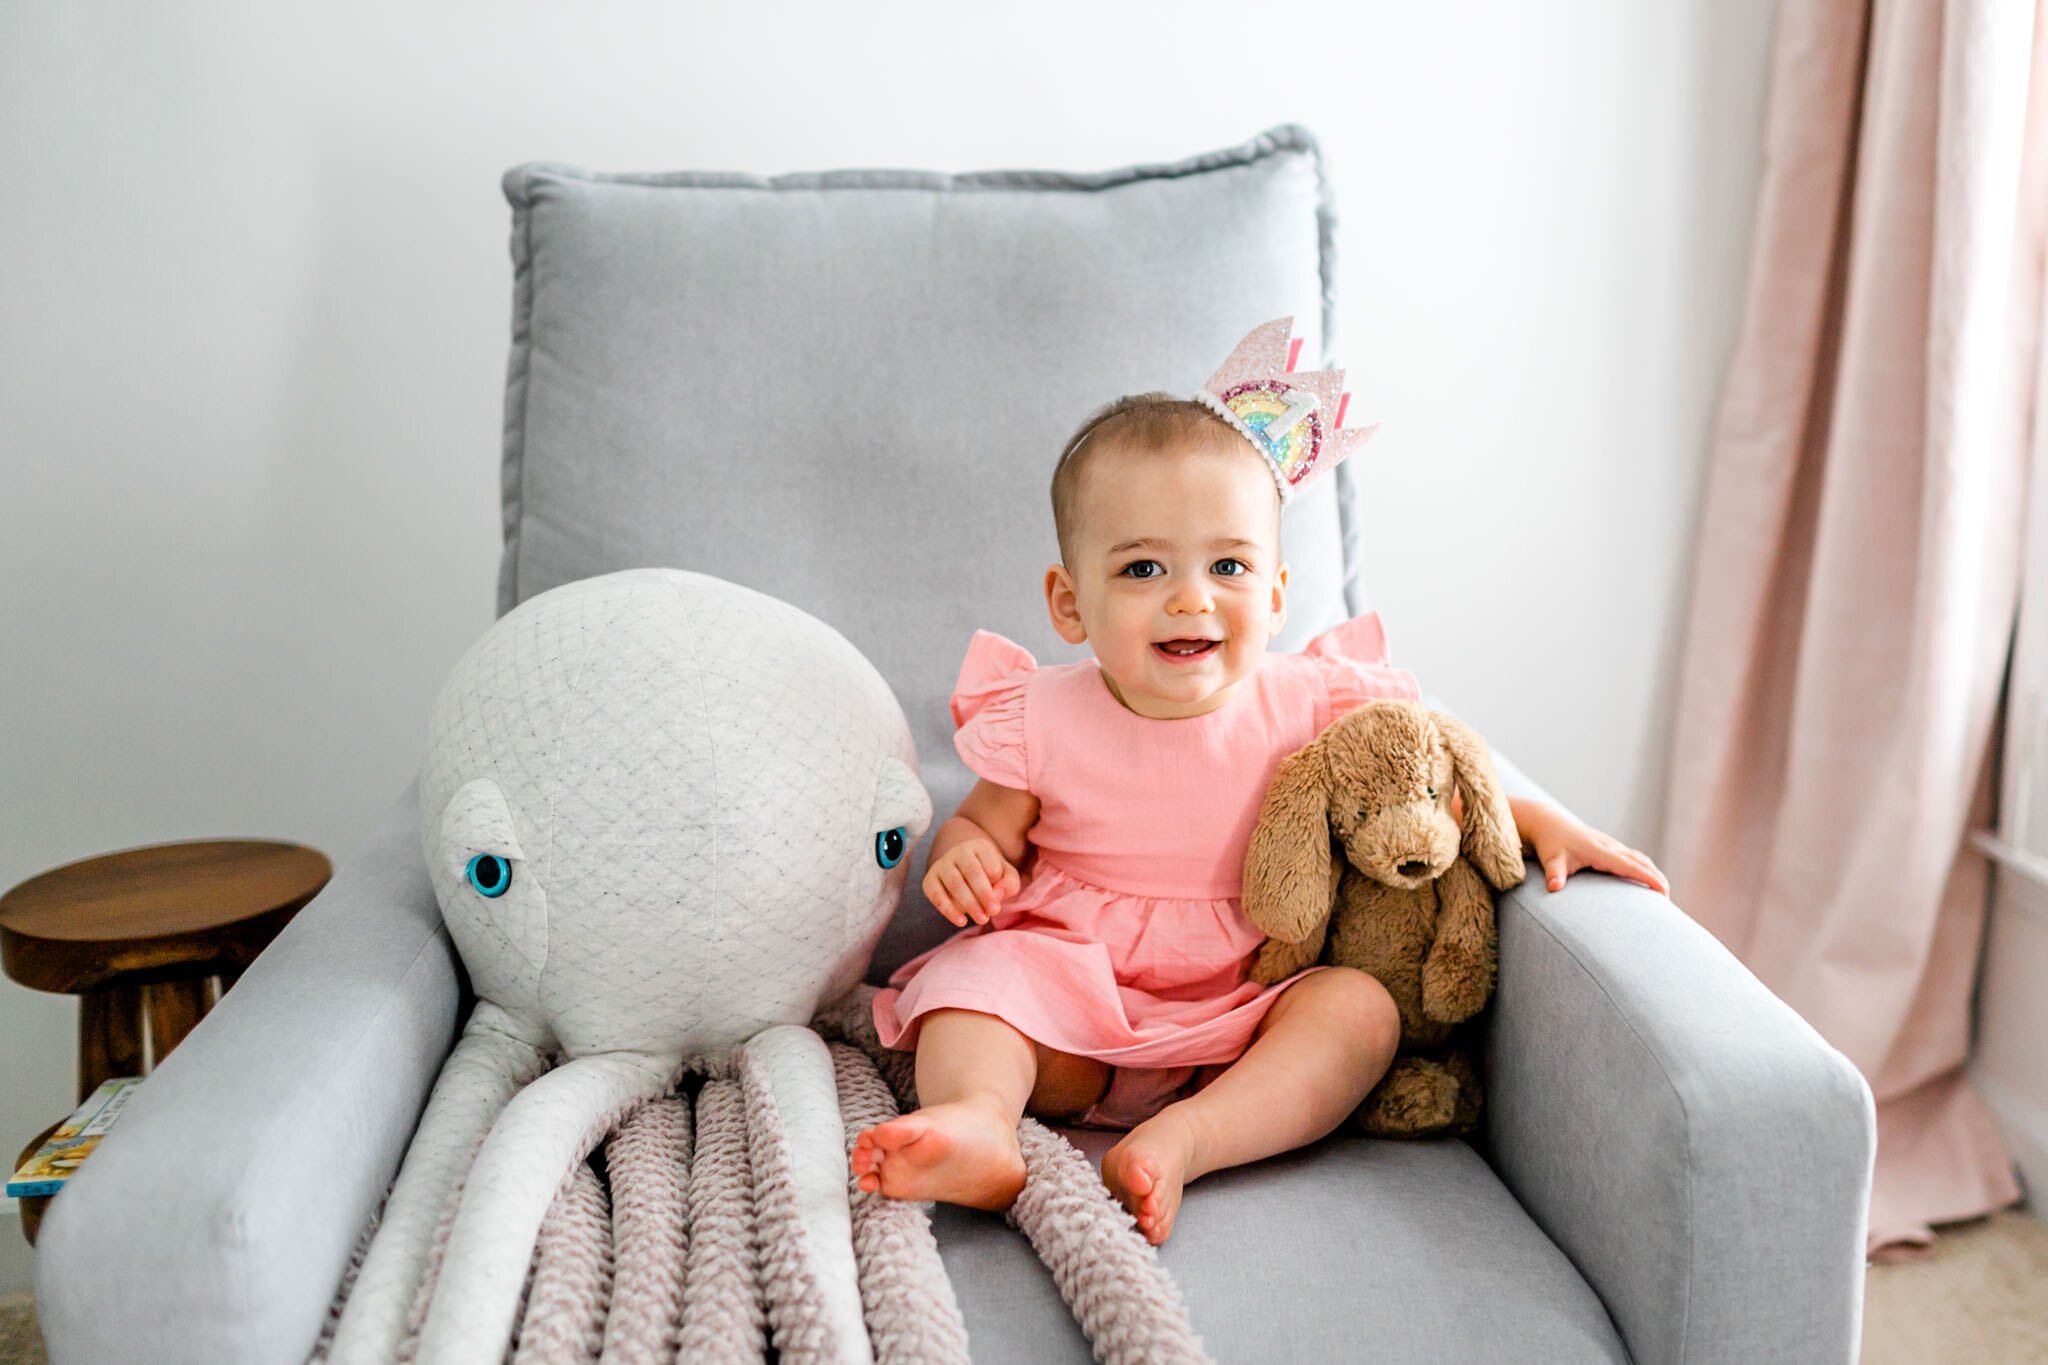 Lifestyle Durham Family Photographer | By G. Lin Photography | Baby girl sitting on chair with stuffed animals